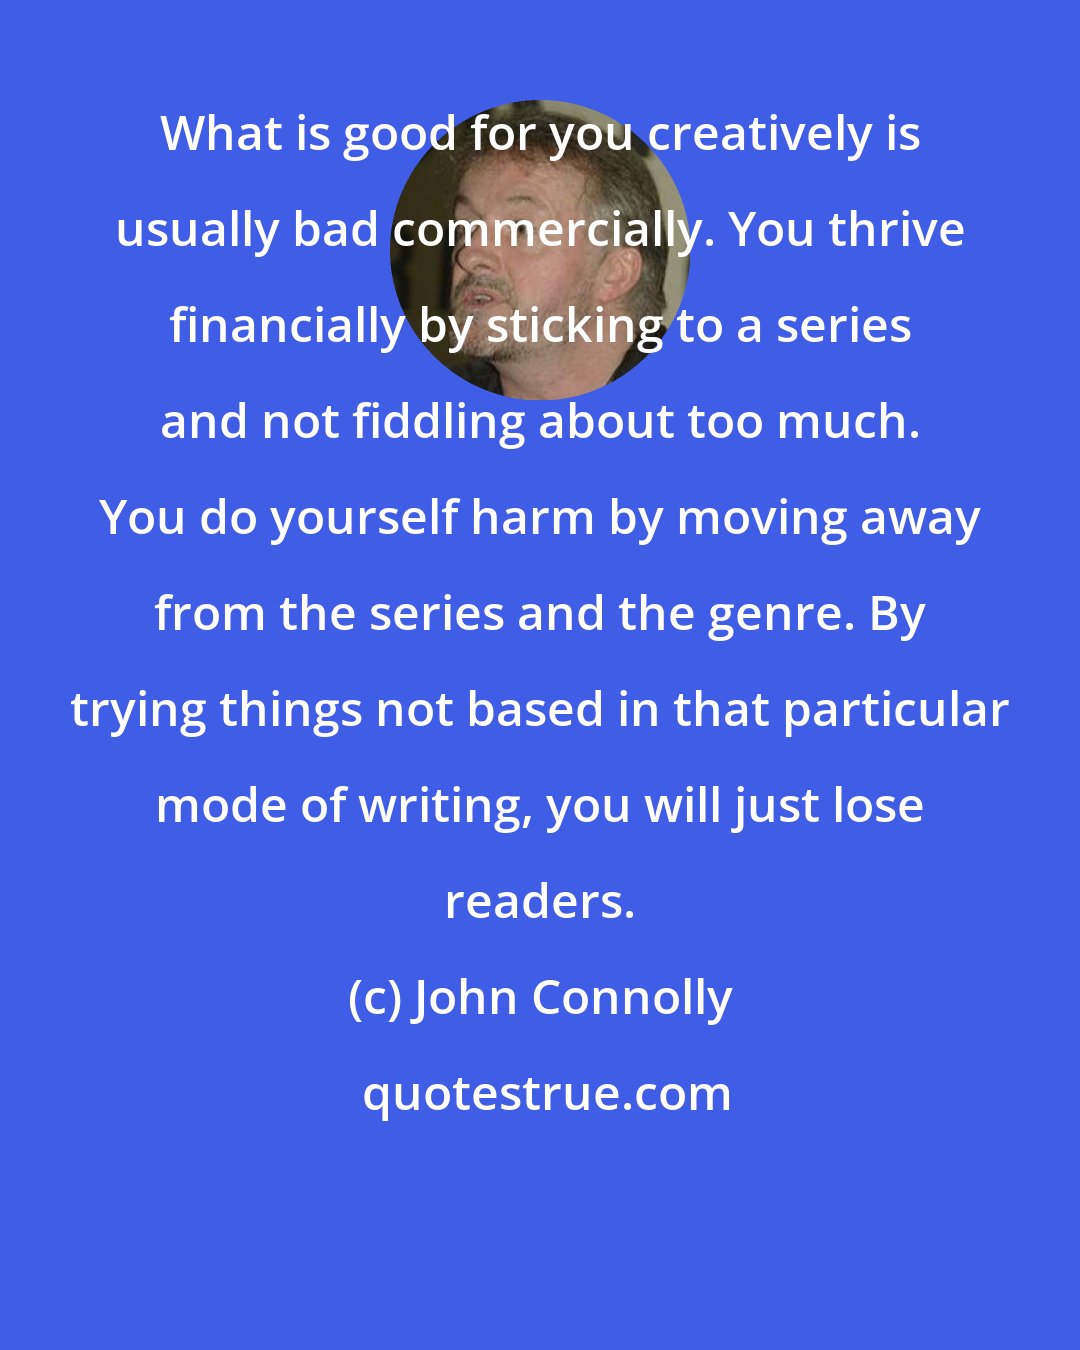 John Connolly: What is good for you creatively is usually bad commercially. You thrive financially by sticking to a series and not fiddling about too much. You do yourself harm by moving away from the series and the genre. By trying things not based in that particular mode of writing, you will just lose readers.